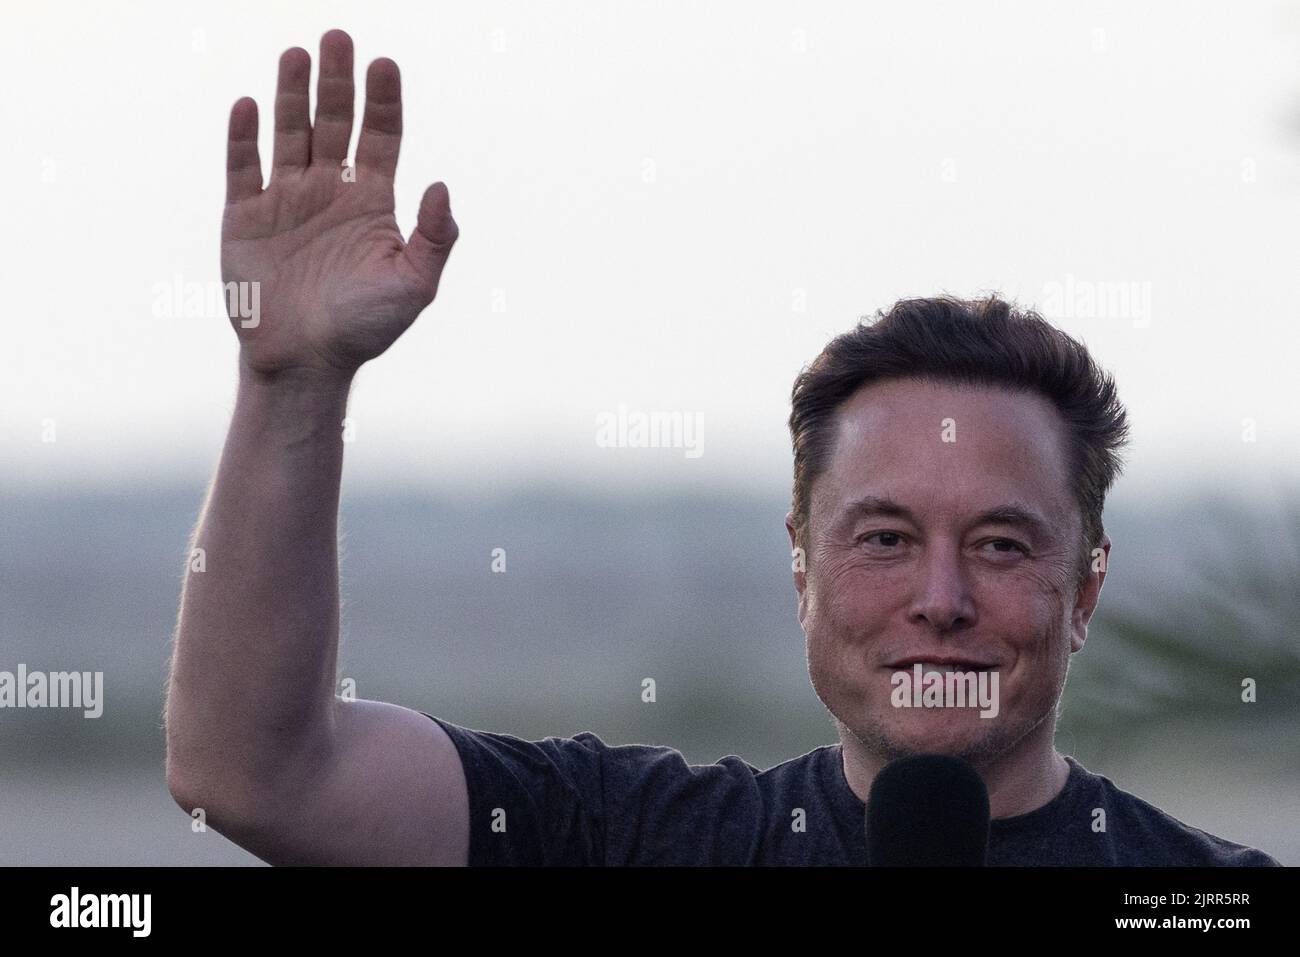 SpaceX Chief Engineer Elon Musk waves during a joint news conference with T-Mobile CEO Mike Sievert (not pictured) at the SpaceX Starbase, in Brownsville, Texas, U.S., August 25, 2022. REUTERS/Adrees Latif Stock Photo